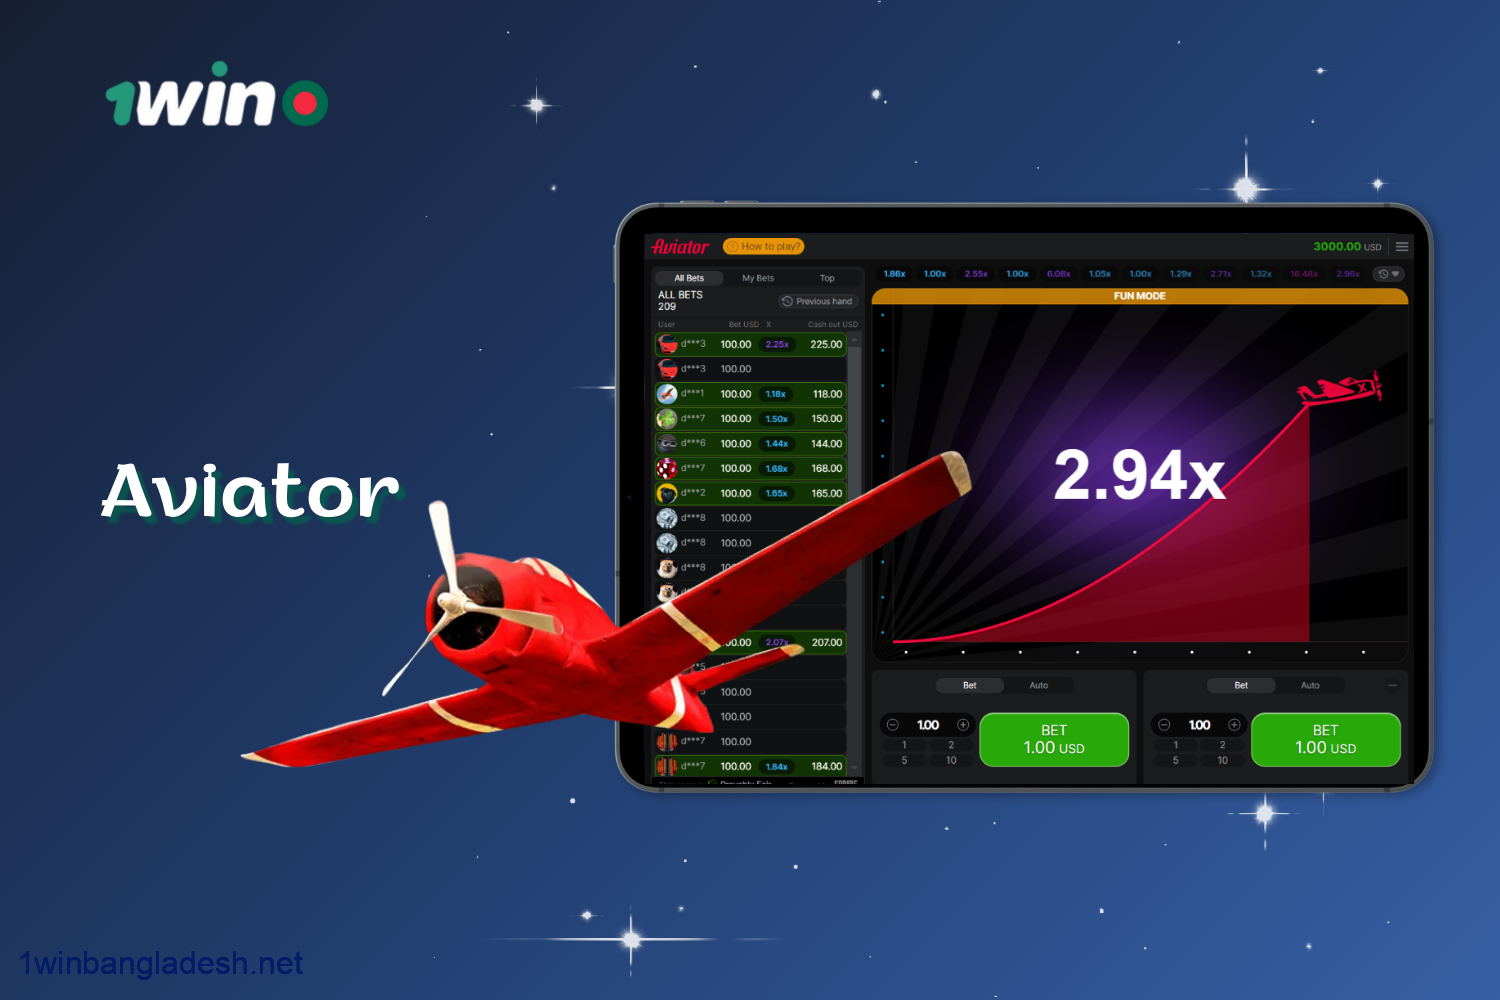 1win offers players in Bangladesh the popular Crash game Aviator